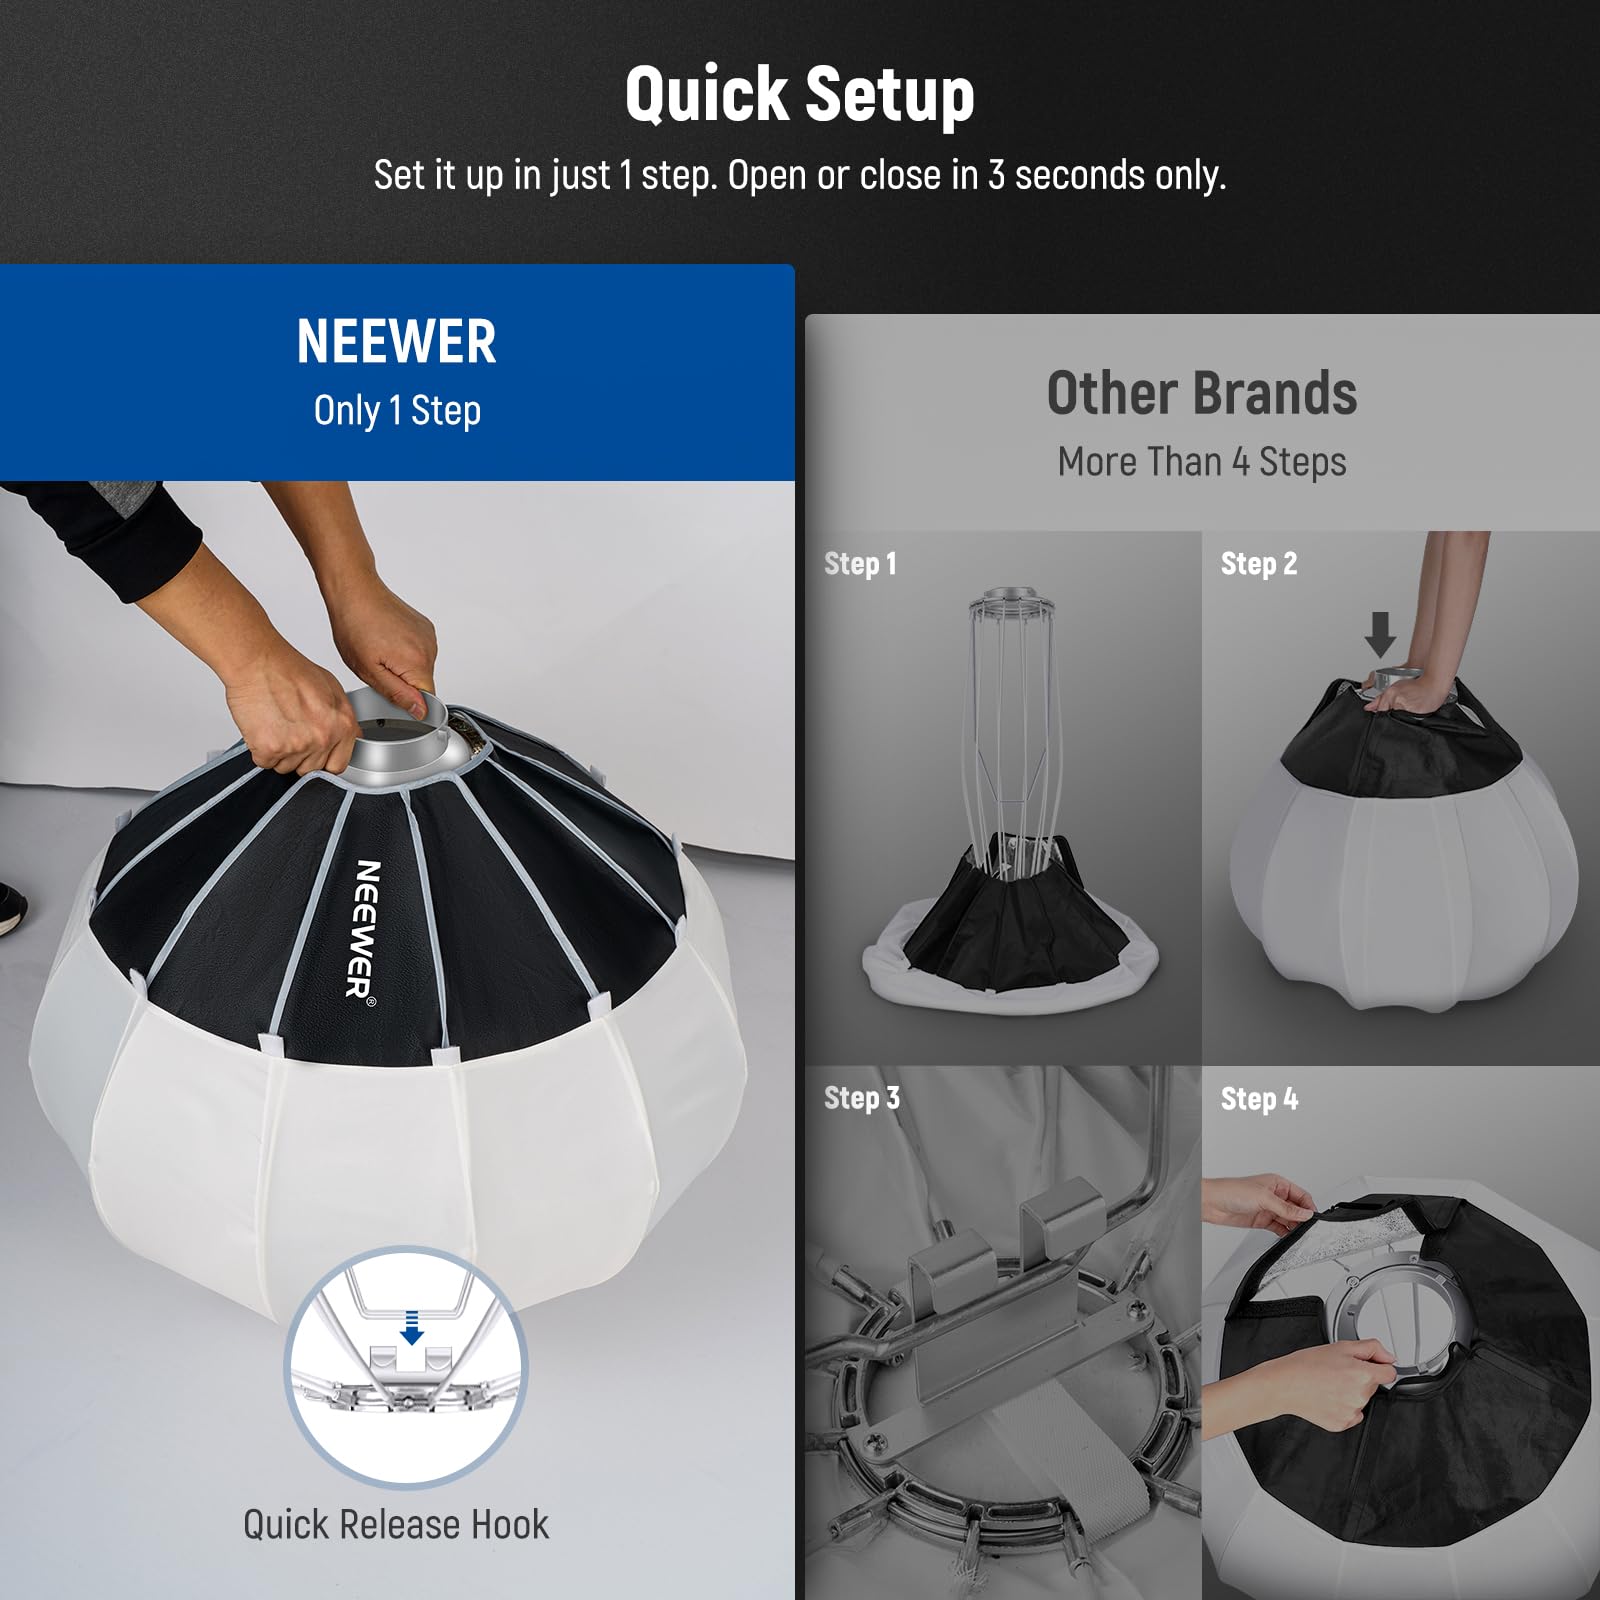 NEEWER 20"/50cm Lantern Softbox One Step Quick Release, 360° Light Diffuser with Skirt, Bowens Mount for Video Light CB60 CB100 CB150 Compatible with Aputure Light 600d Amaran 60x Godox SL60W, NS50L